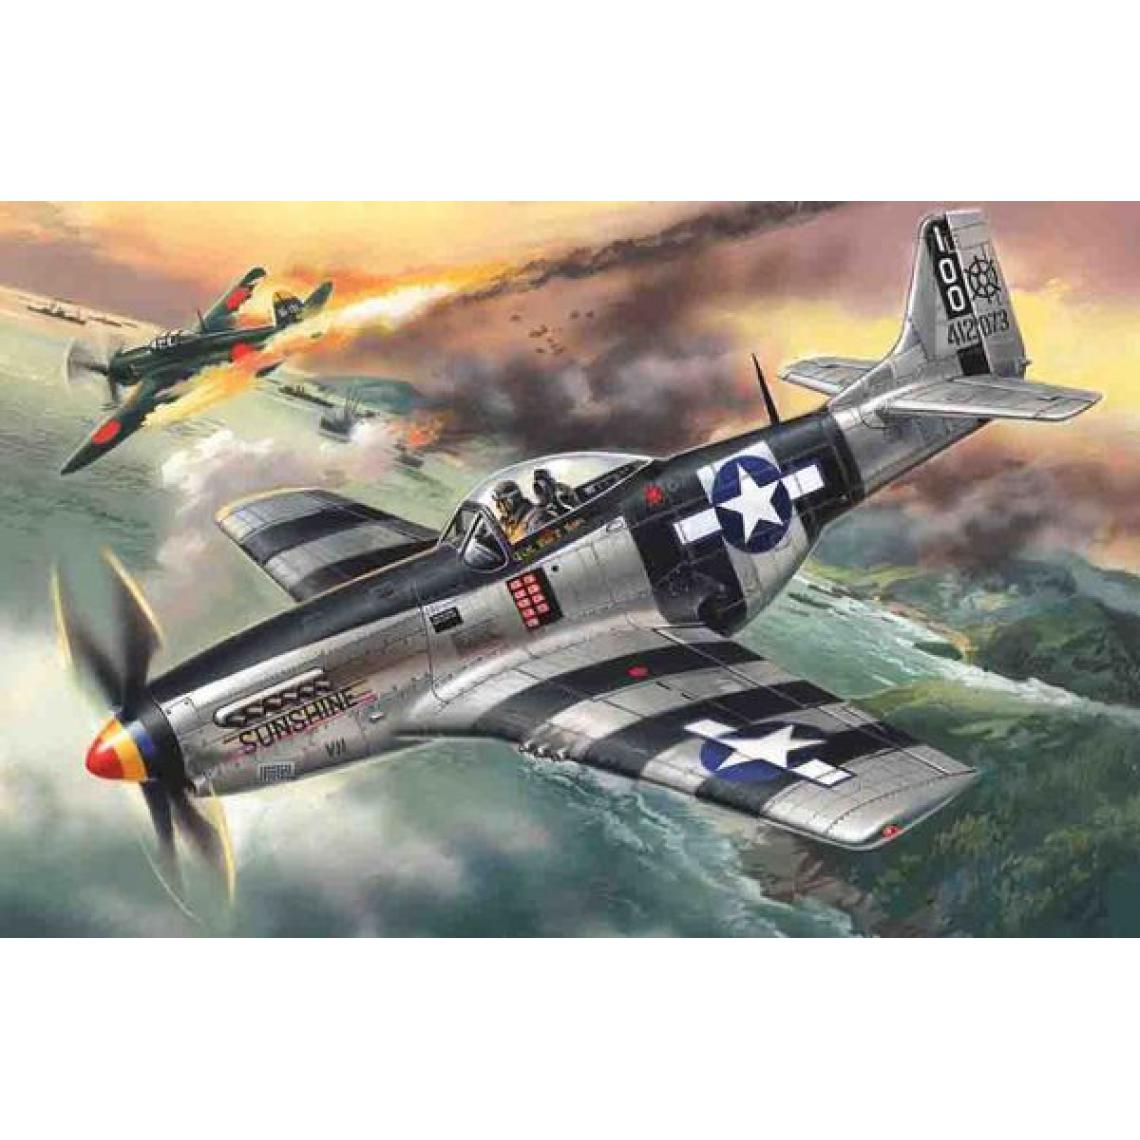 Icm - Mustang P-51K, WWII American Fighter - 1:48e - ICM - Accessoires et pièces